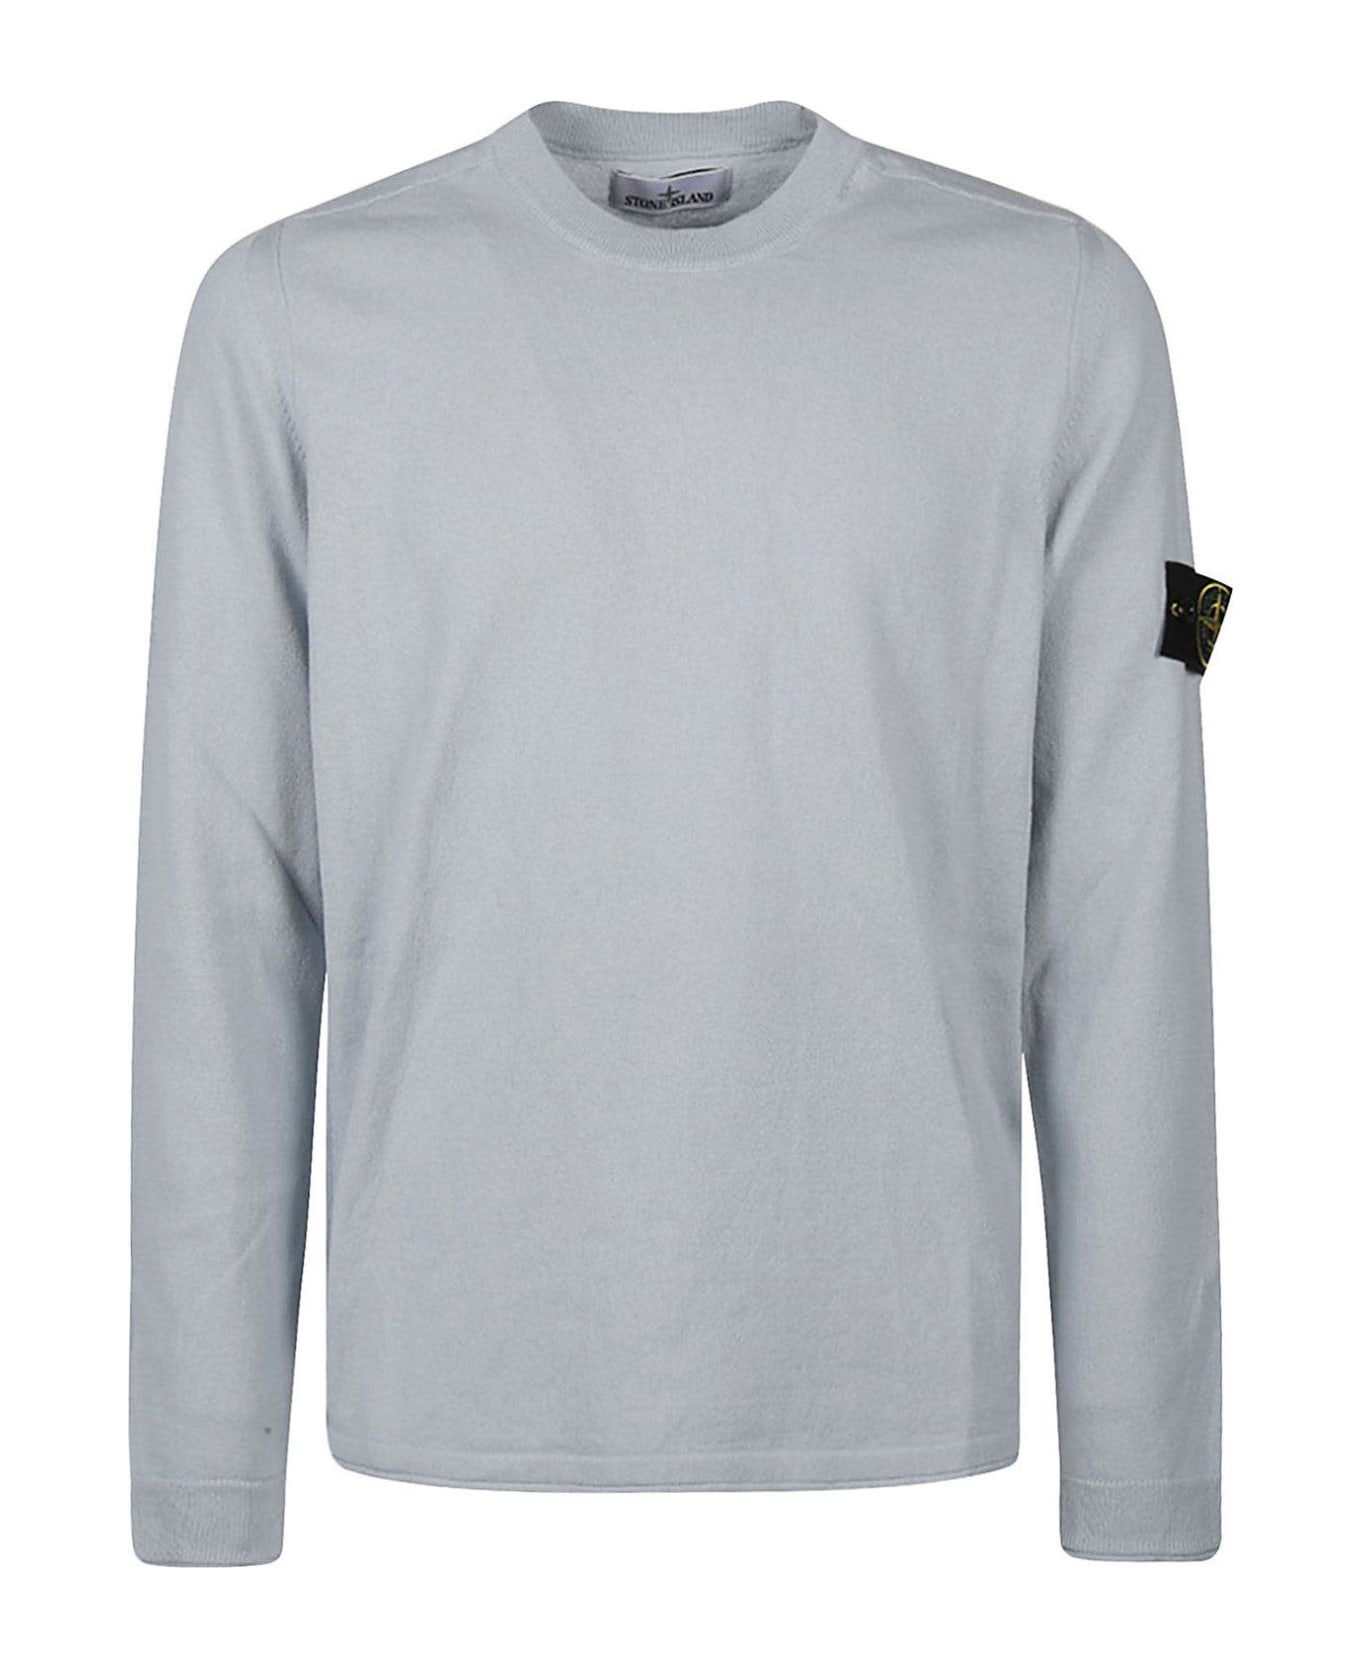 Stone Island Compass Patch Crewneck Knitted Jumper - Azzurro